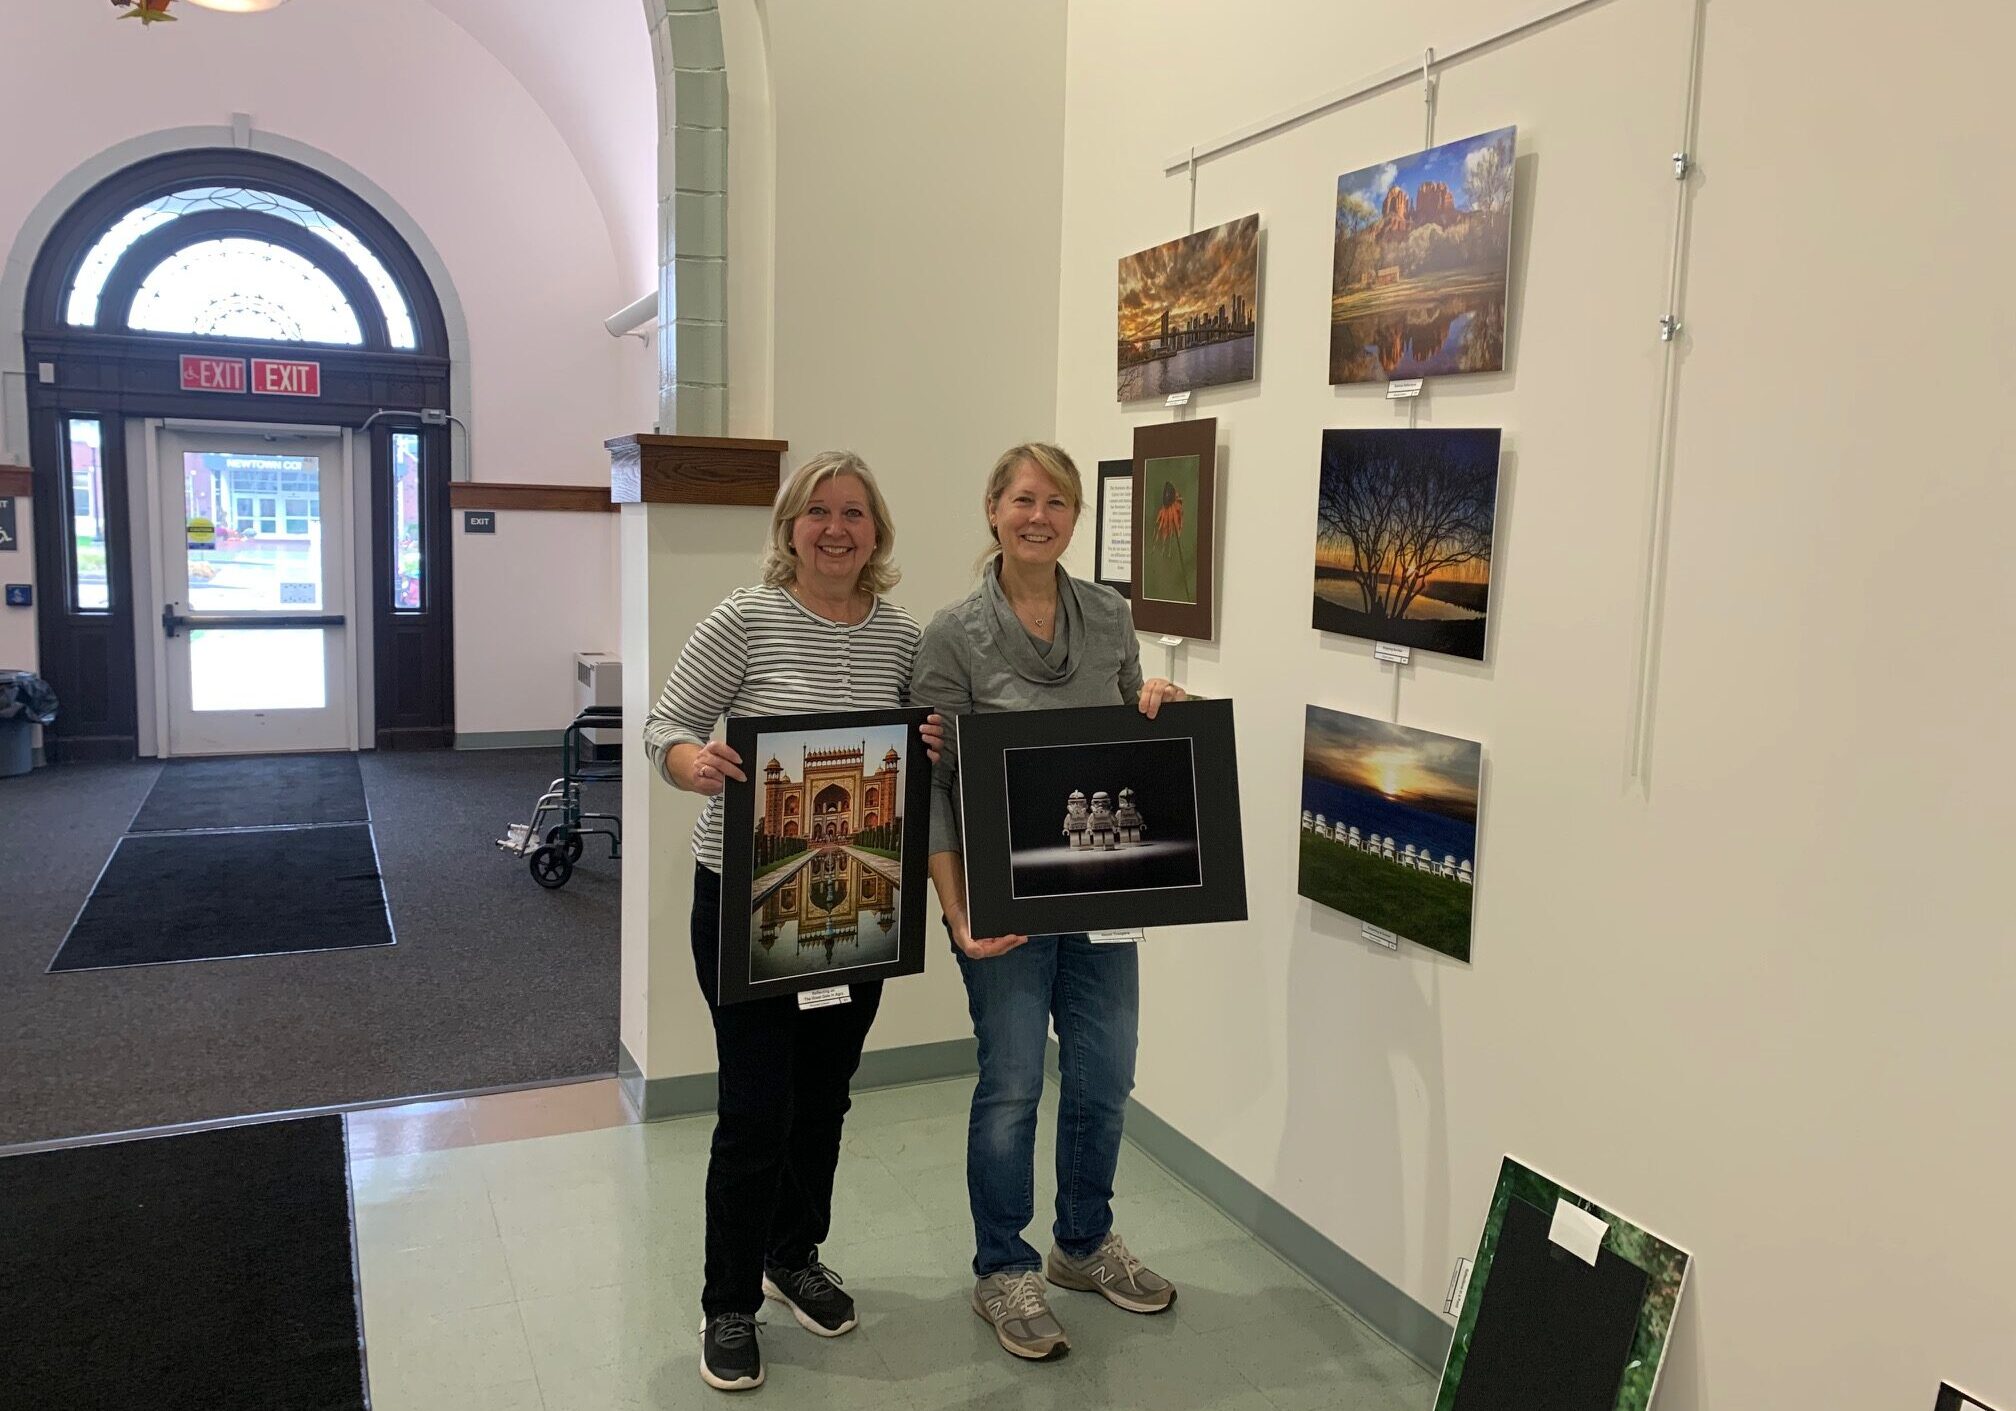 Rhonda Cullens, left, Flagpole Photographers Exhibit Chair and Sandy Schill, NECCC (New England Camera Club Council) representative, present their contribution to the “Newtown and Beyond” photography show at the Newtown Municipal Art Gallery through December 8.